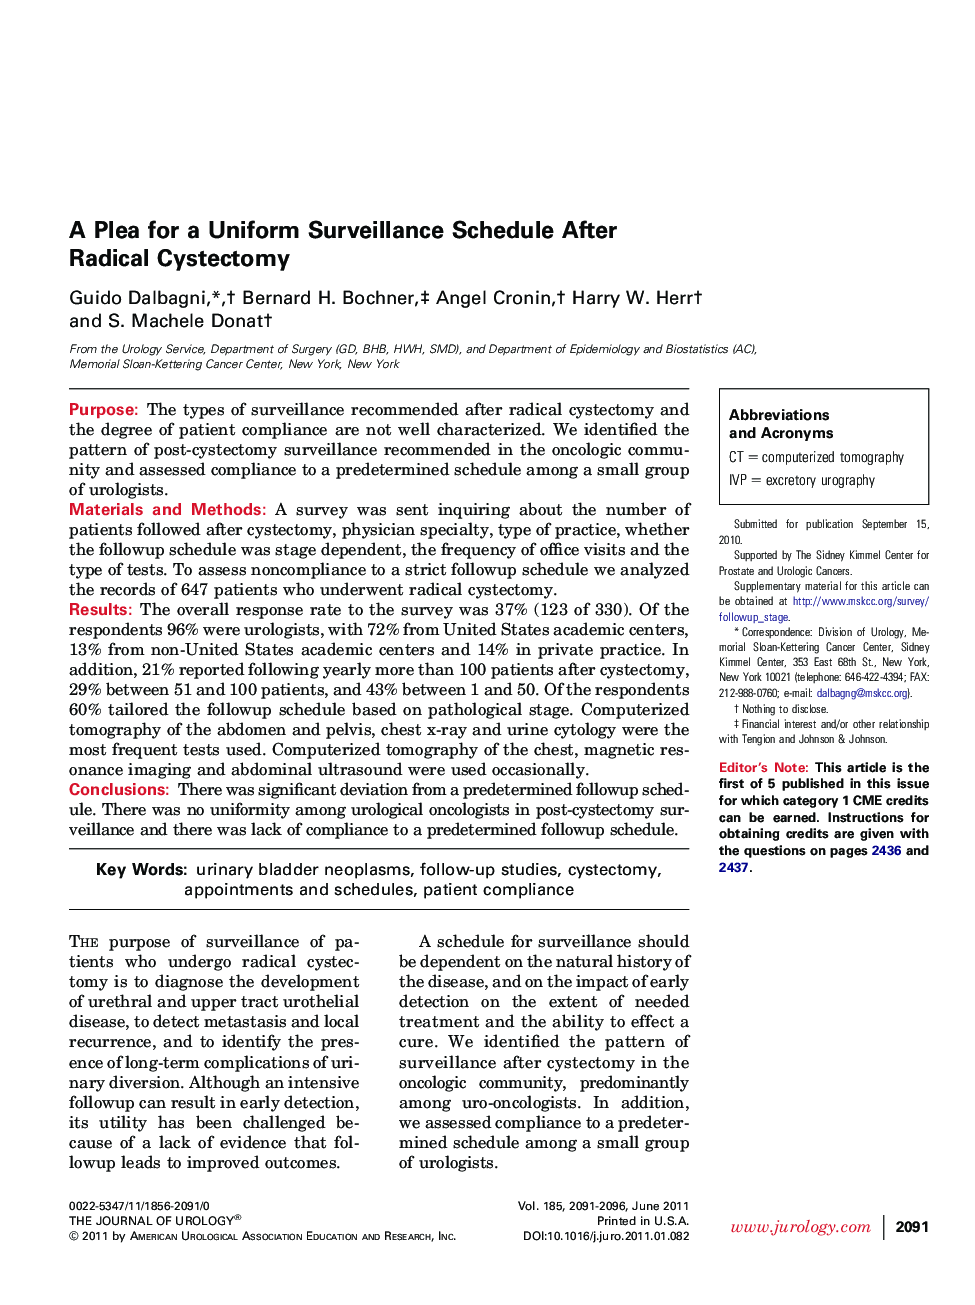 A Plea for a Uniform Surveillance Schedule After Radical Cystectomy